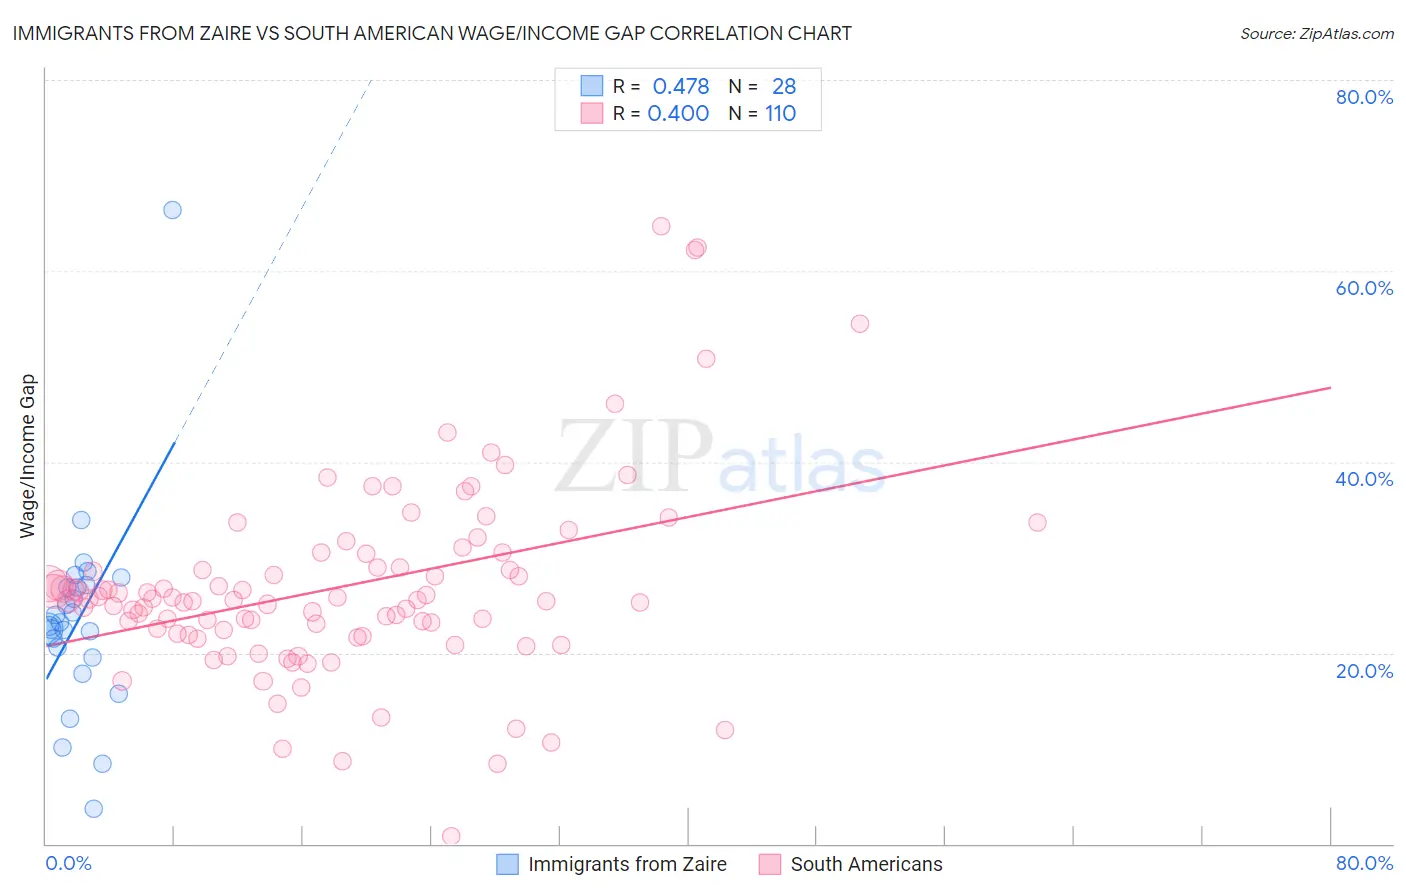 Immigrants from Zaire vs South American Wage/Income Gap